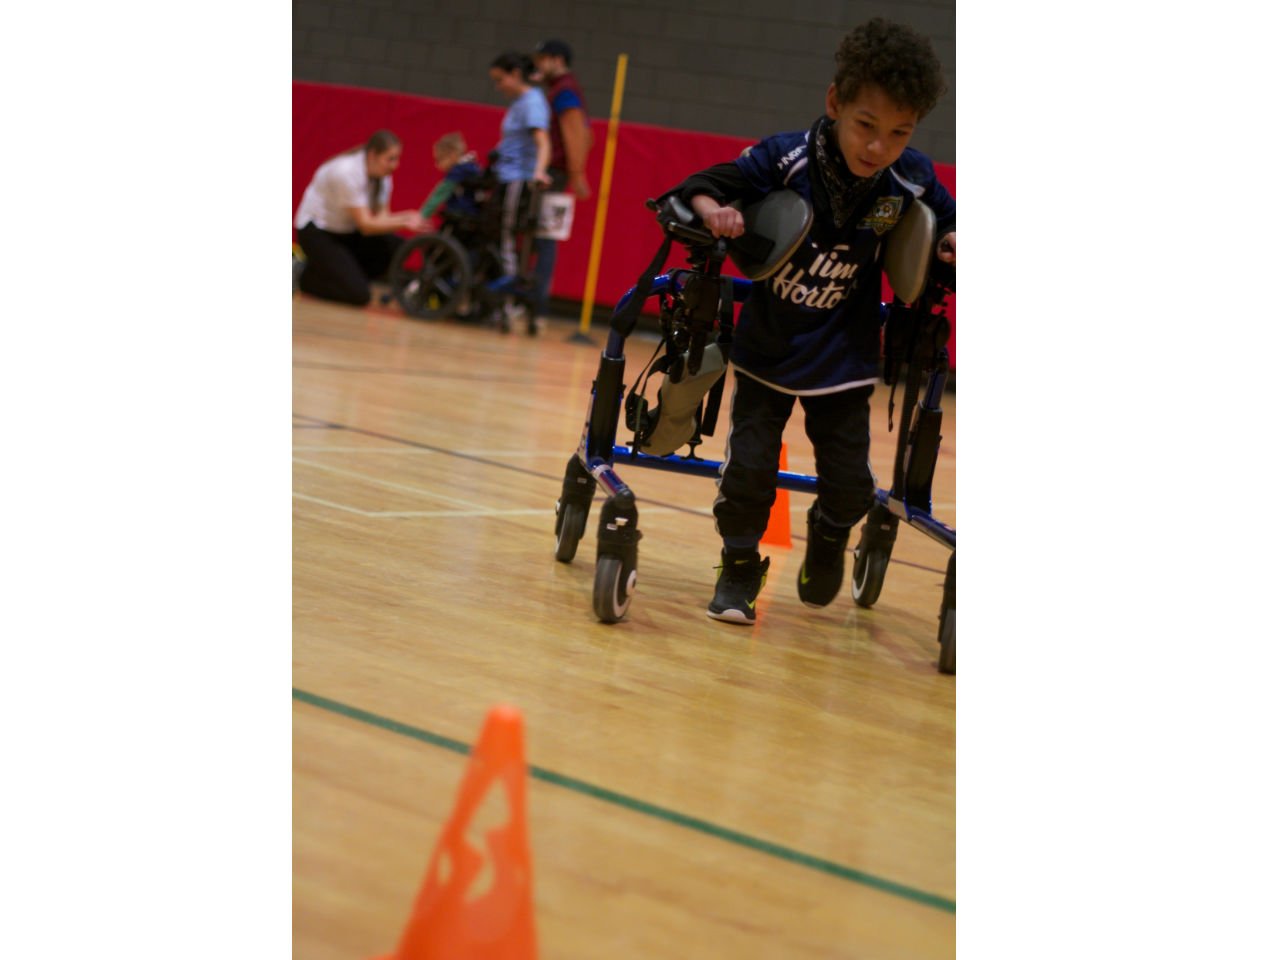 a young boy with cerebral palsy plays soccer in a gym 